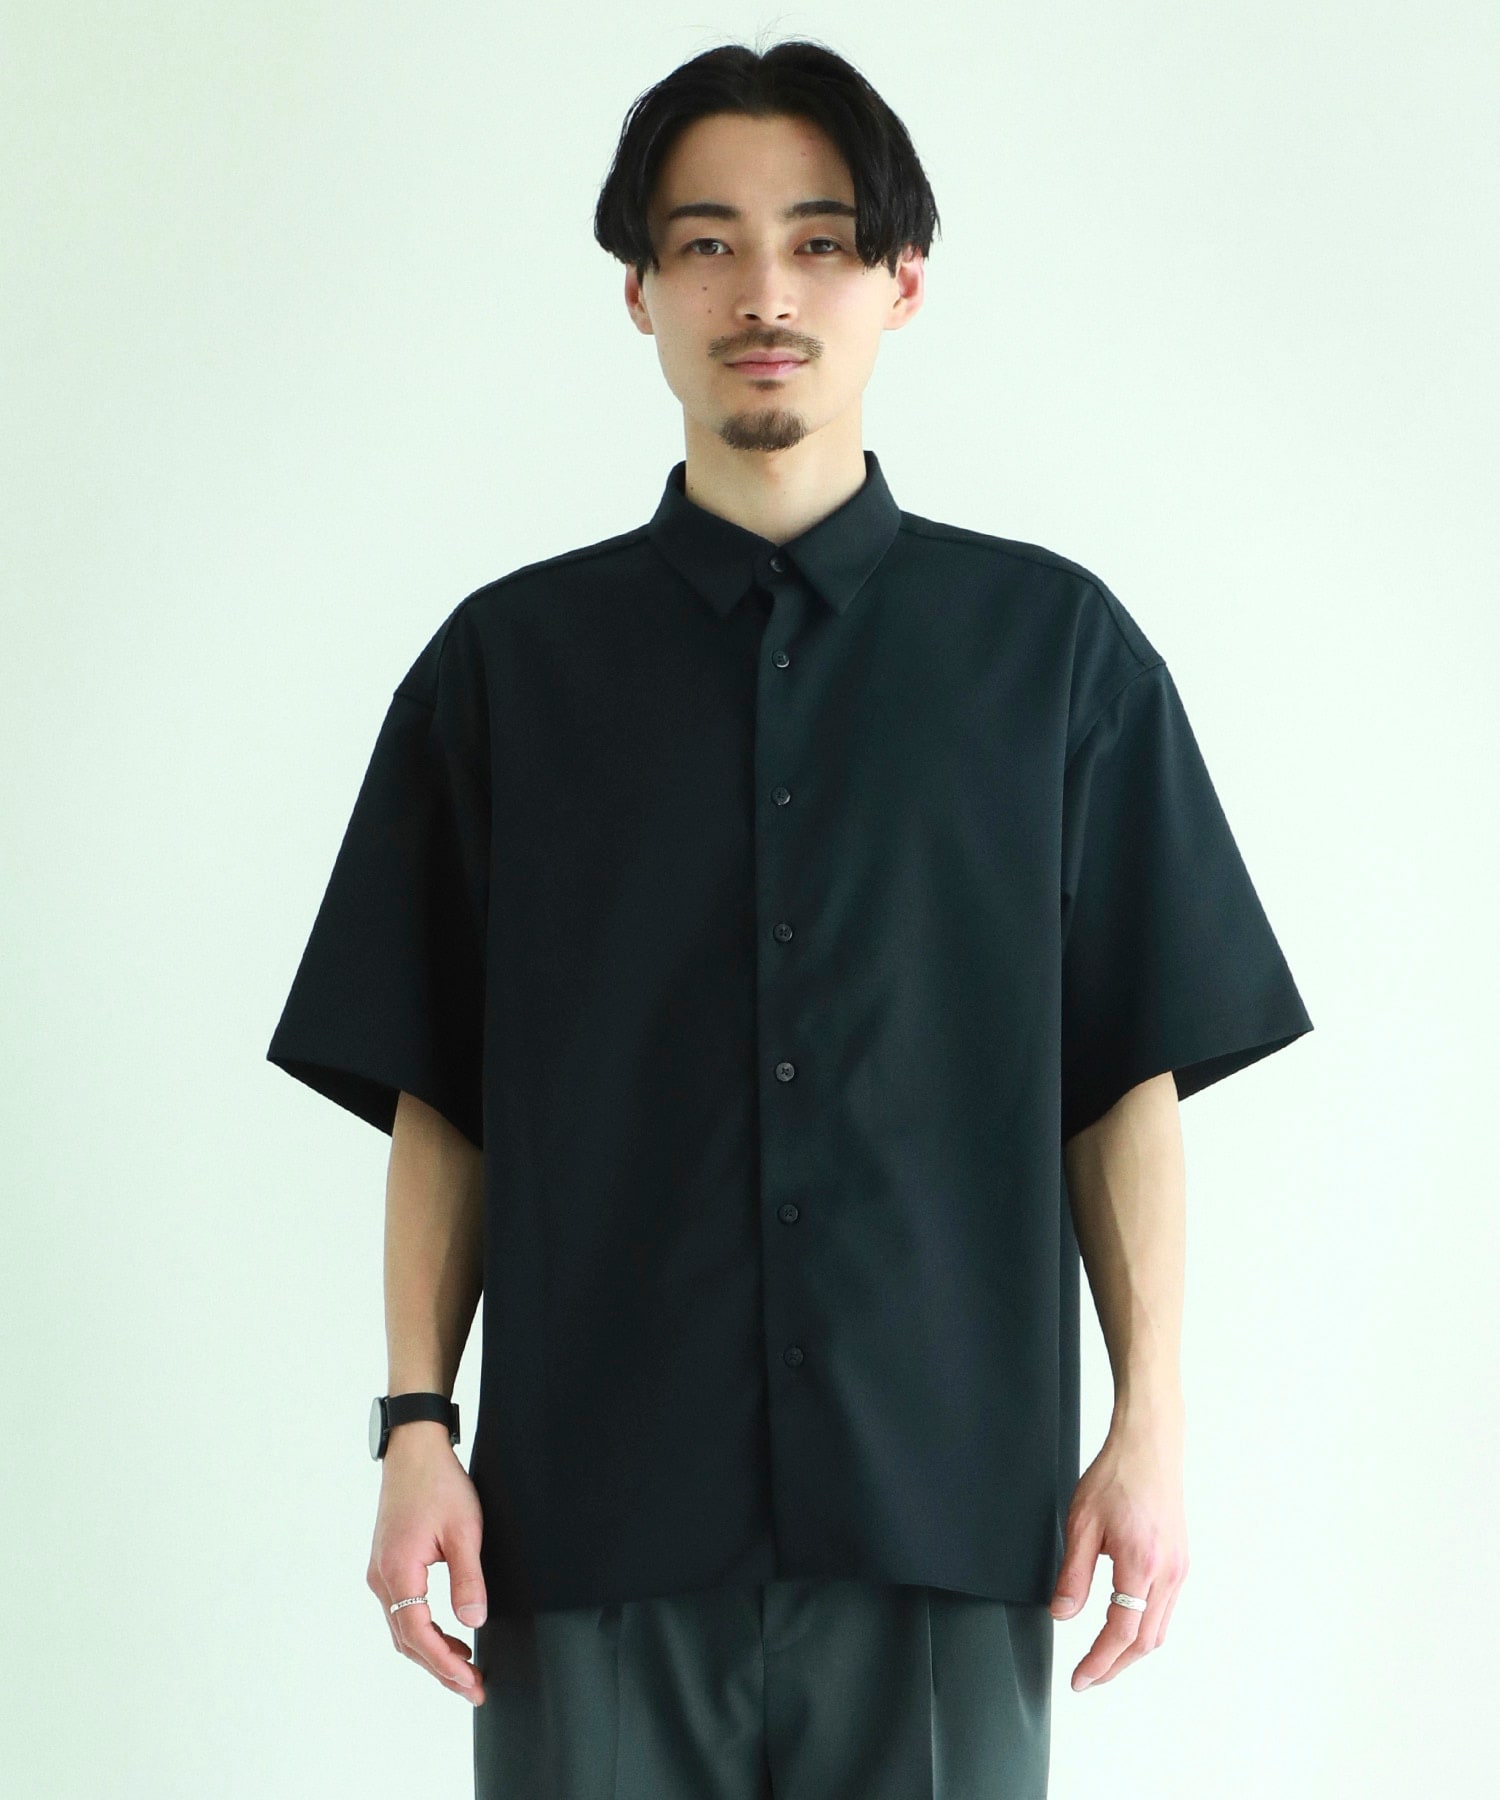 TWO SIDED S/S SHIRT